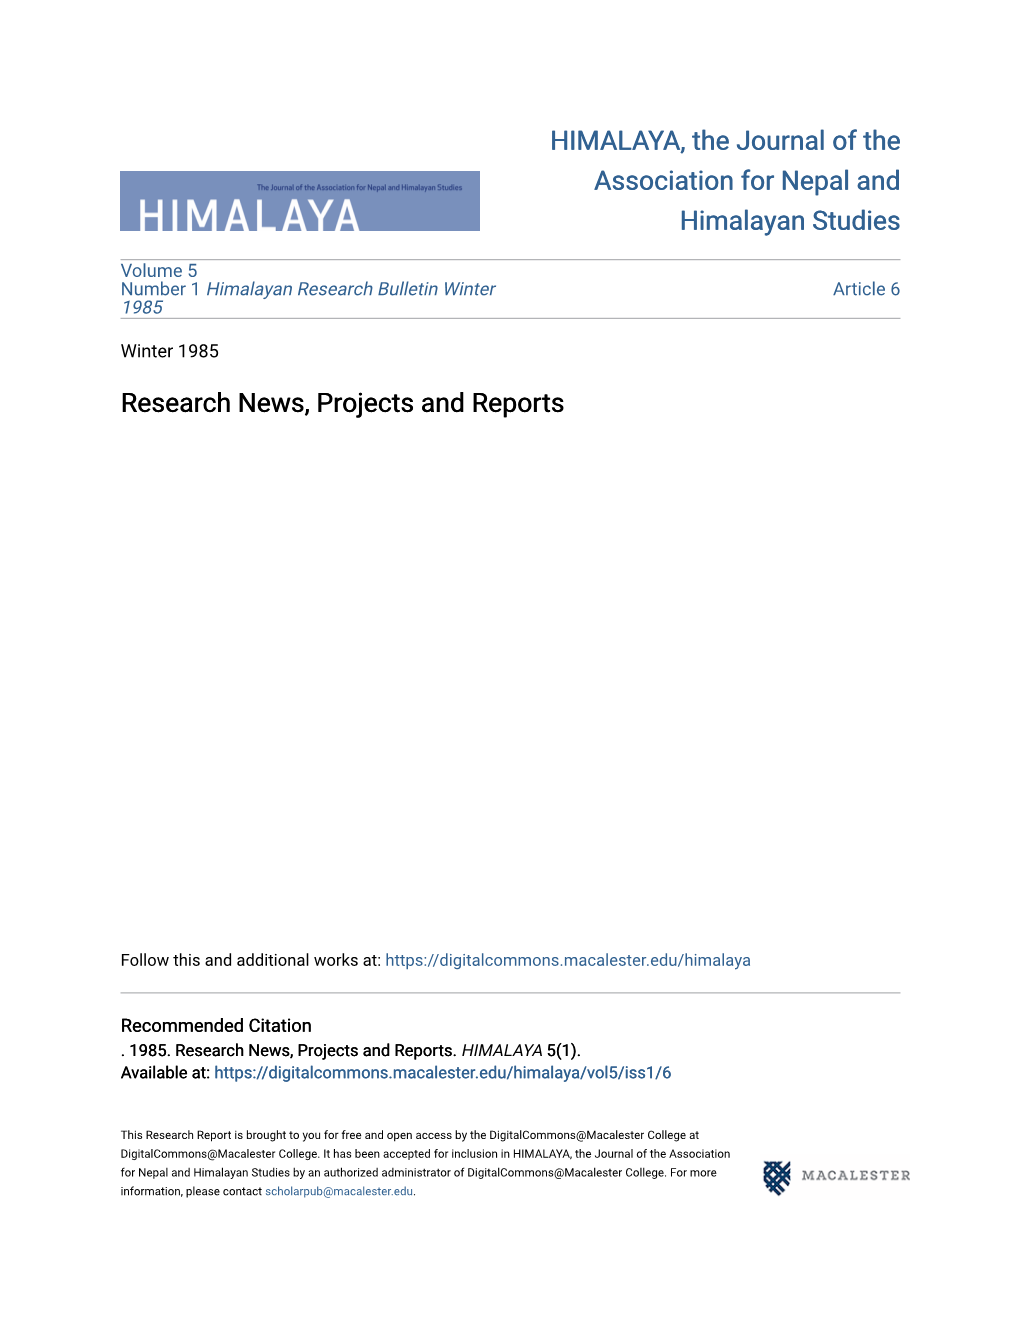 Research News, Projects and Reports